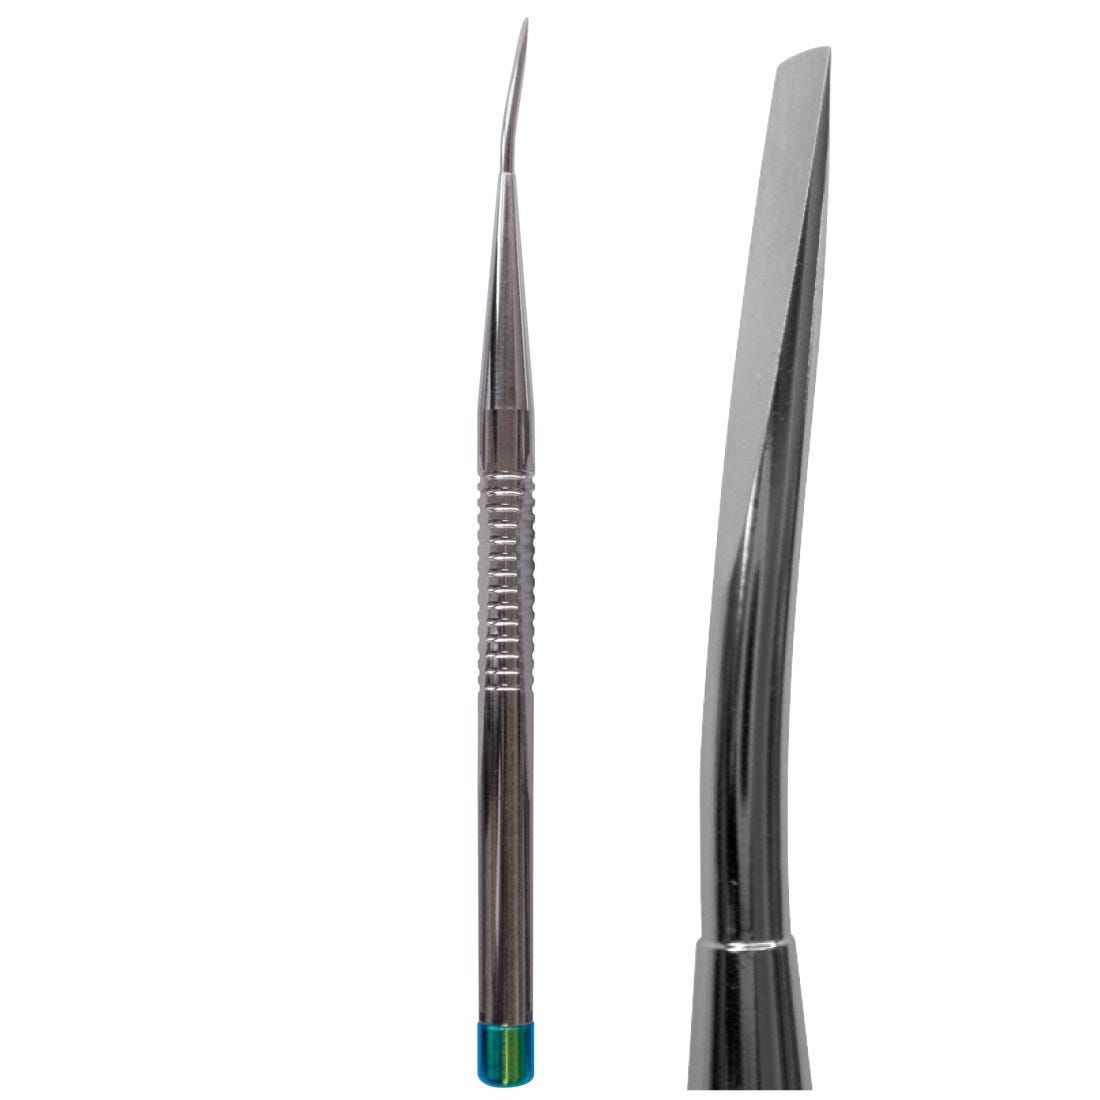 ACE Periodontal Ligament/Luxator Elevator Curved "Out" Green Ss 17-4 (H900) Ti 6Al-4V Eli